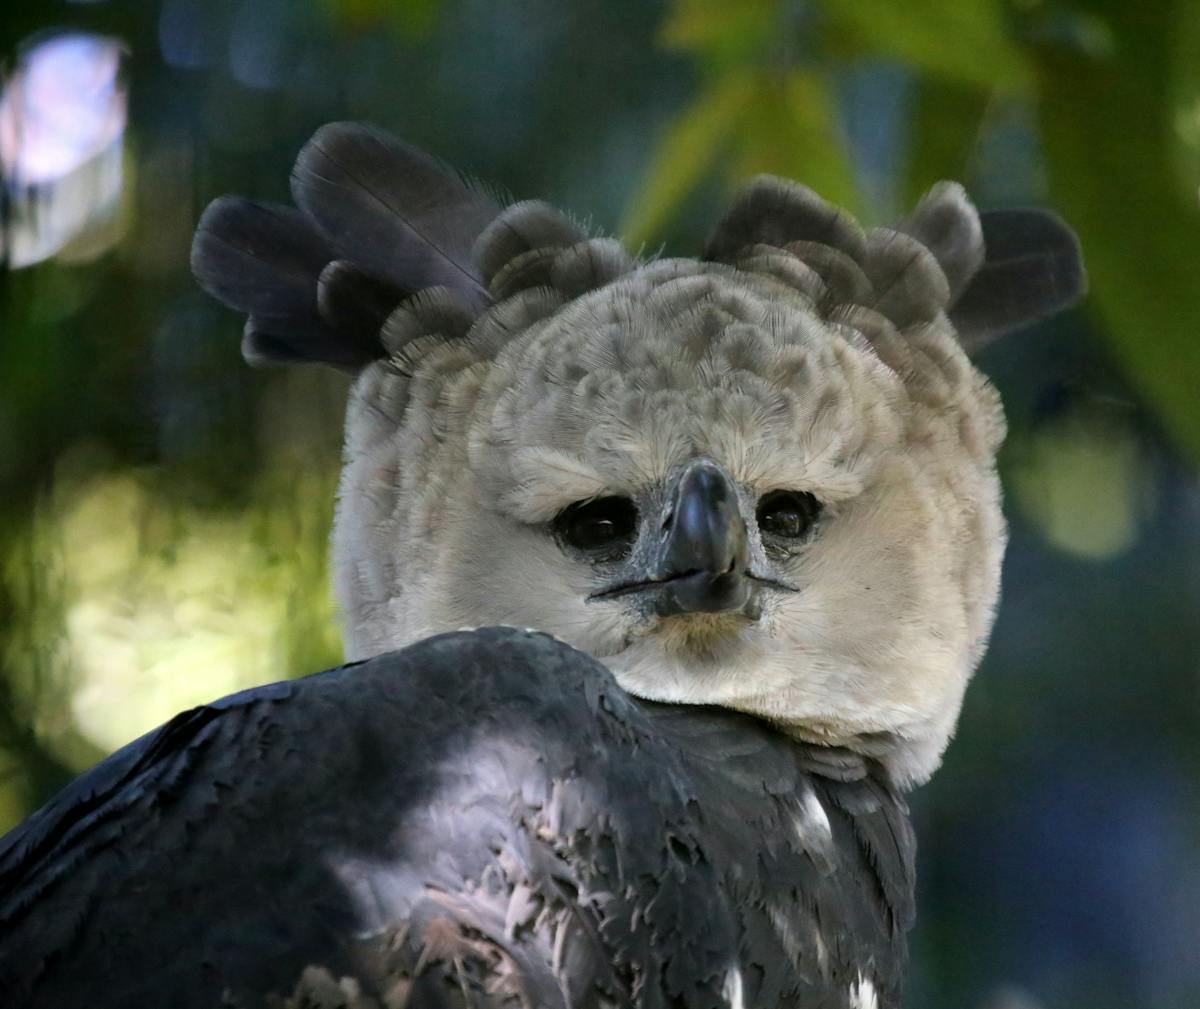 Bird alive! What the devil is a harpy eagle?